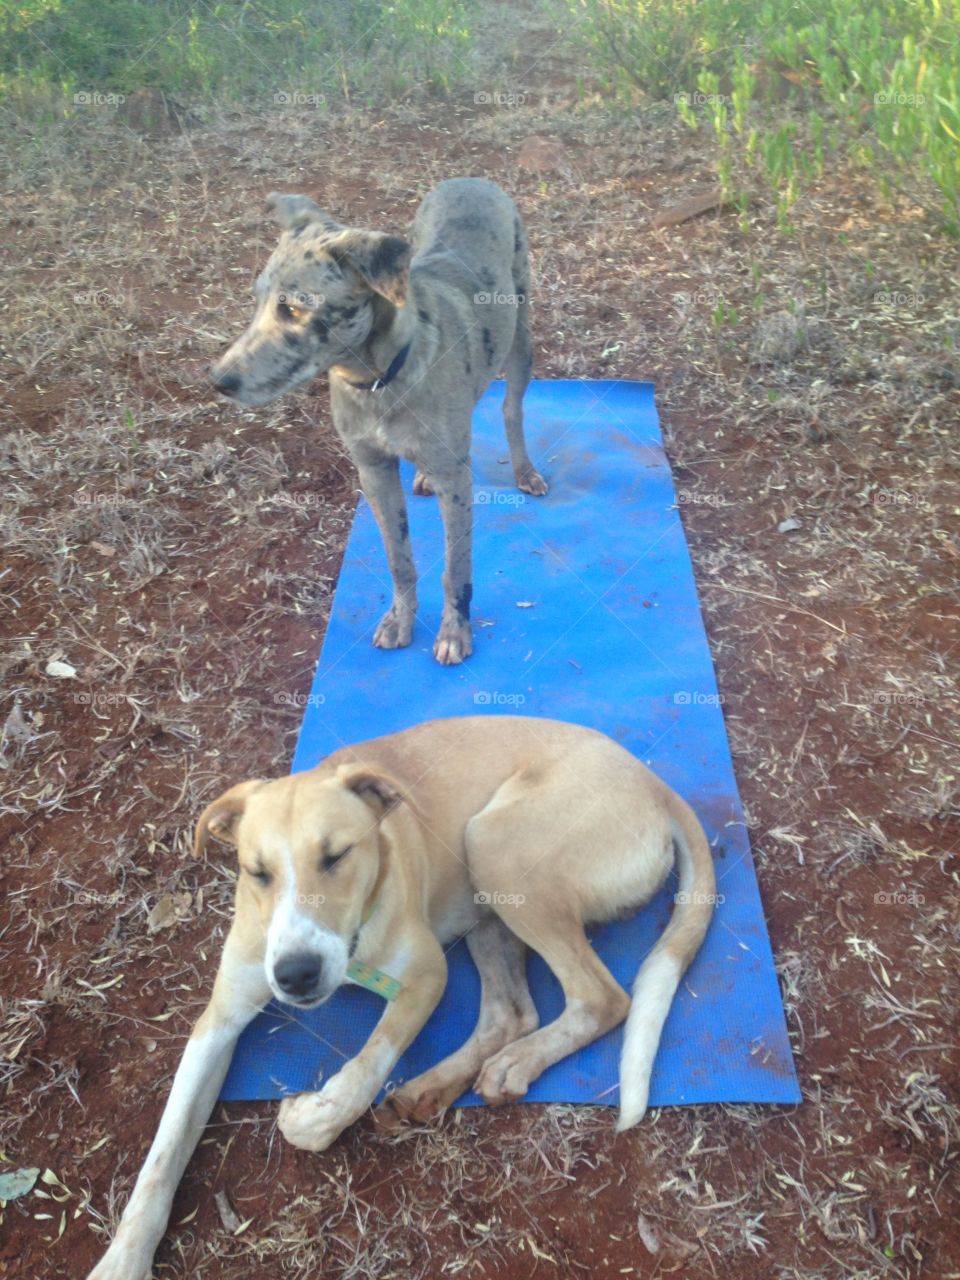 Downward dogs ready for their yoga class 